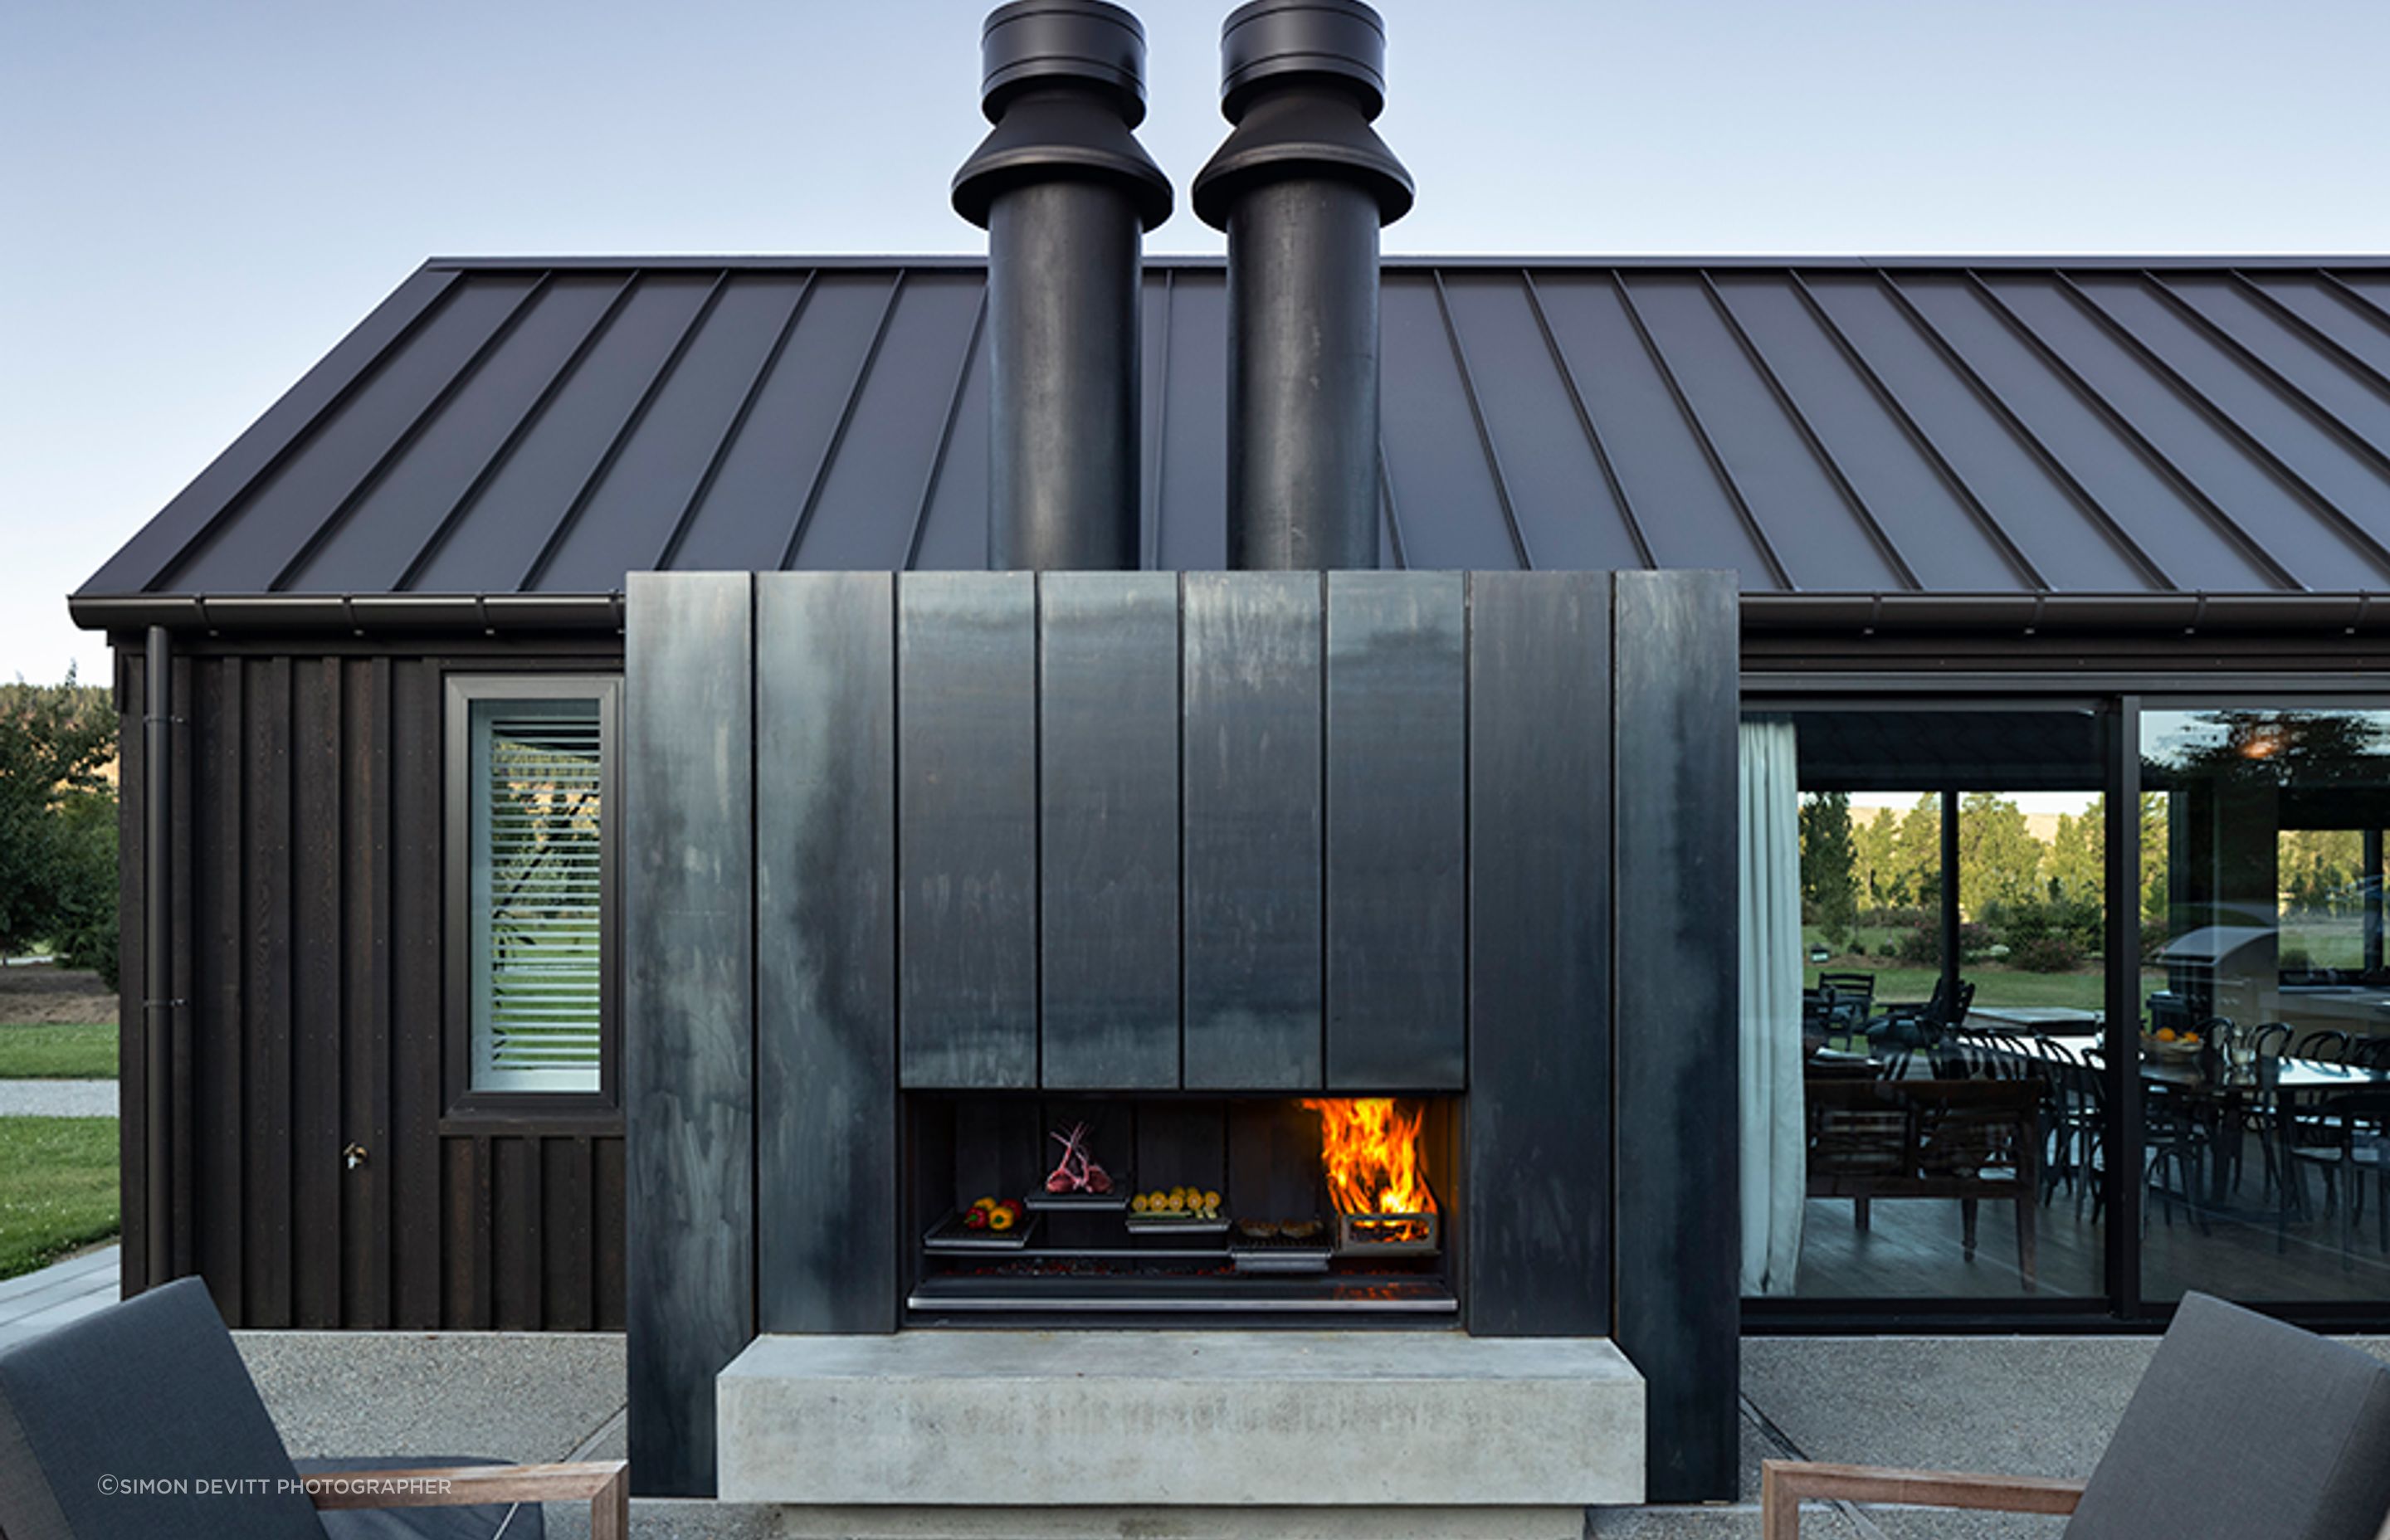 In the outdoor courtyard, Escea’s handsome EK1550 Outdoor Fireplace Kitchen takes centre-stage. Like the landscape, this fire commands attention with its rugged good looks, sitting on a concrete plinth hearth and surround in black steel.  There’s nothing